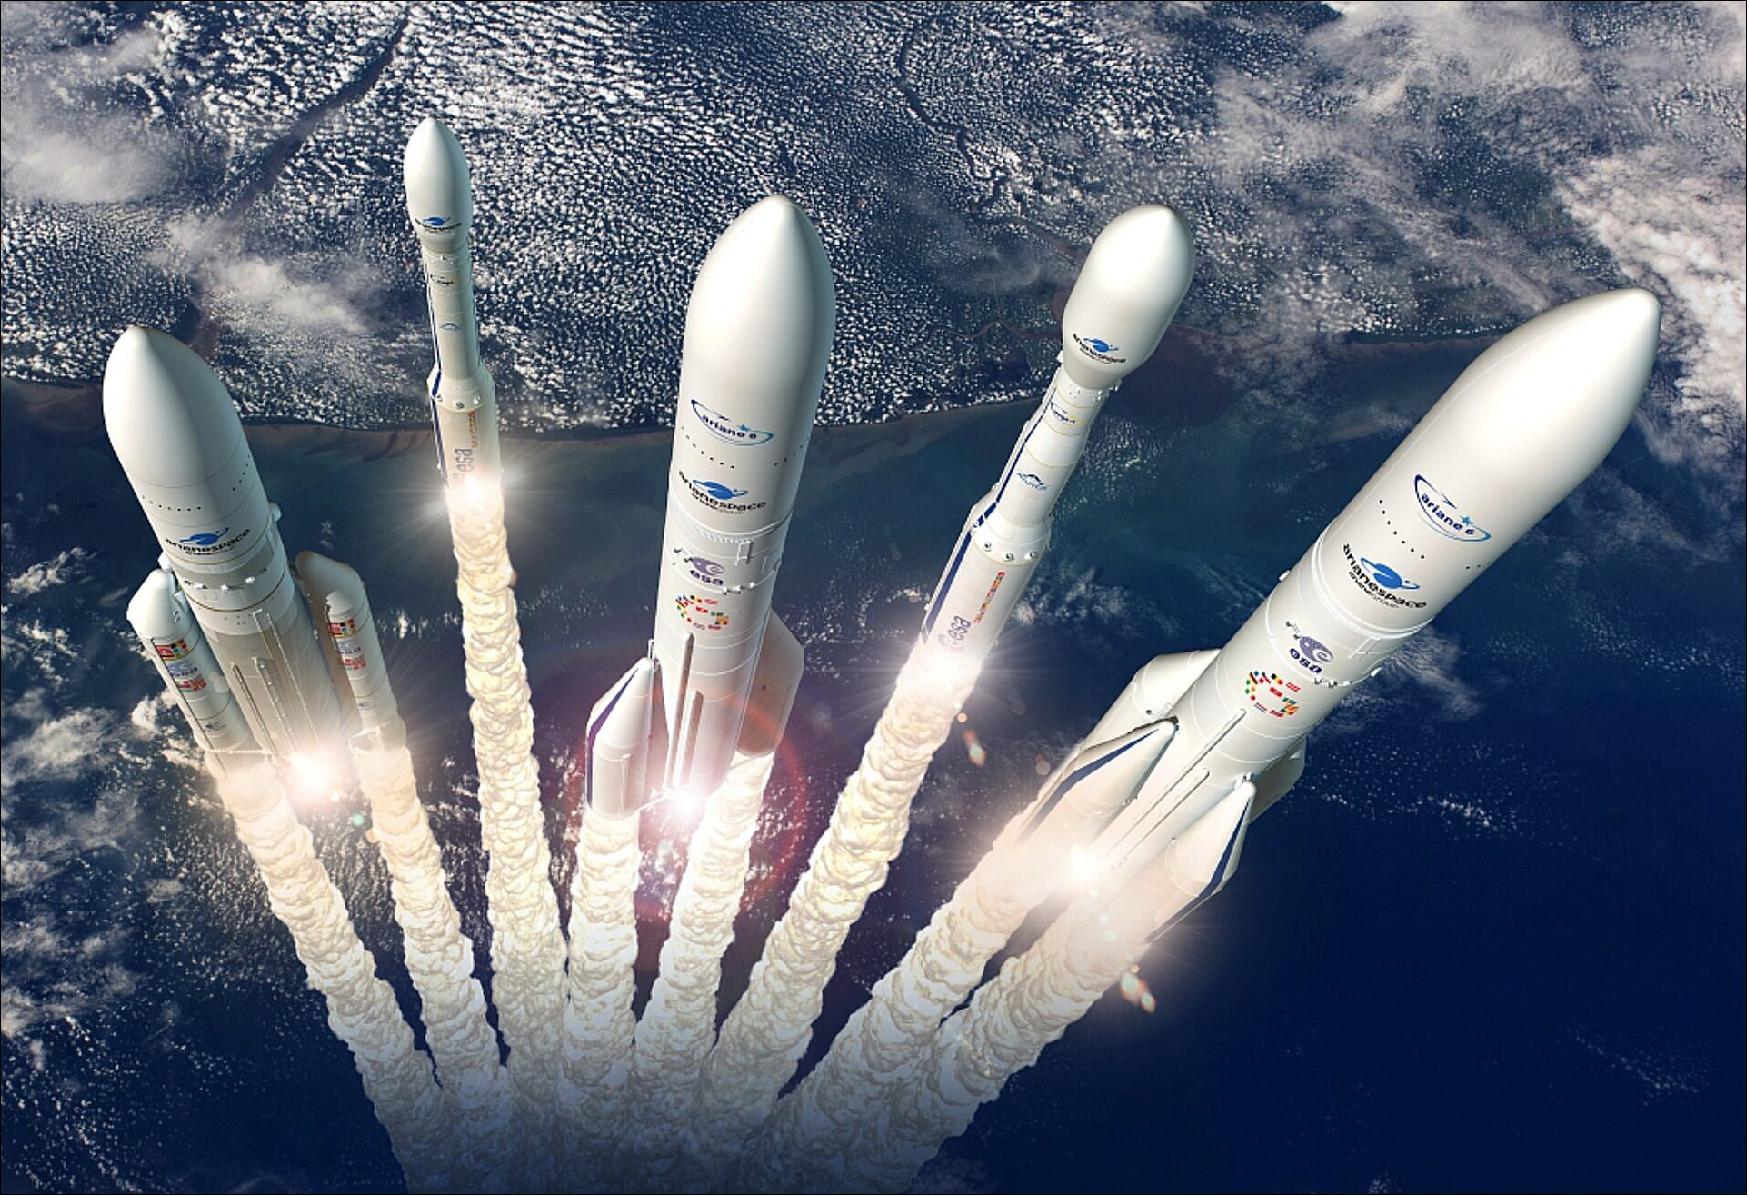 Figure 32: Artist's view of the European launcher family. Shown from left to right: Ariane 5, Vega, the two-booster Ariane 6 (A62), Vega-C, the four-booster Ariane 6 (A64). Ariane 5 and Vega are operated from Europe's Spaceport in Kourou, French Guiana. Vega-C will increase performance from Vega’s current 1.5 t to about 2.2 t in a reference 700 km polar orbit, covering identified European institutional users’ mission needs, with no increase in launch service and operating costs. Ariane 6 provides a modular architecture using either two boosters (Ariane 62) or four boosters (Ariane 64), depending on the required performance. The P120C solid-propellant boosters will be common with Vega-C (image credit: ESA, D. Ducros)